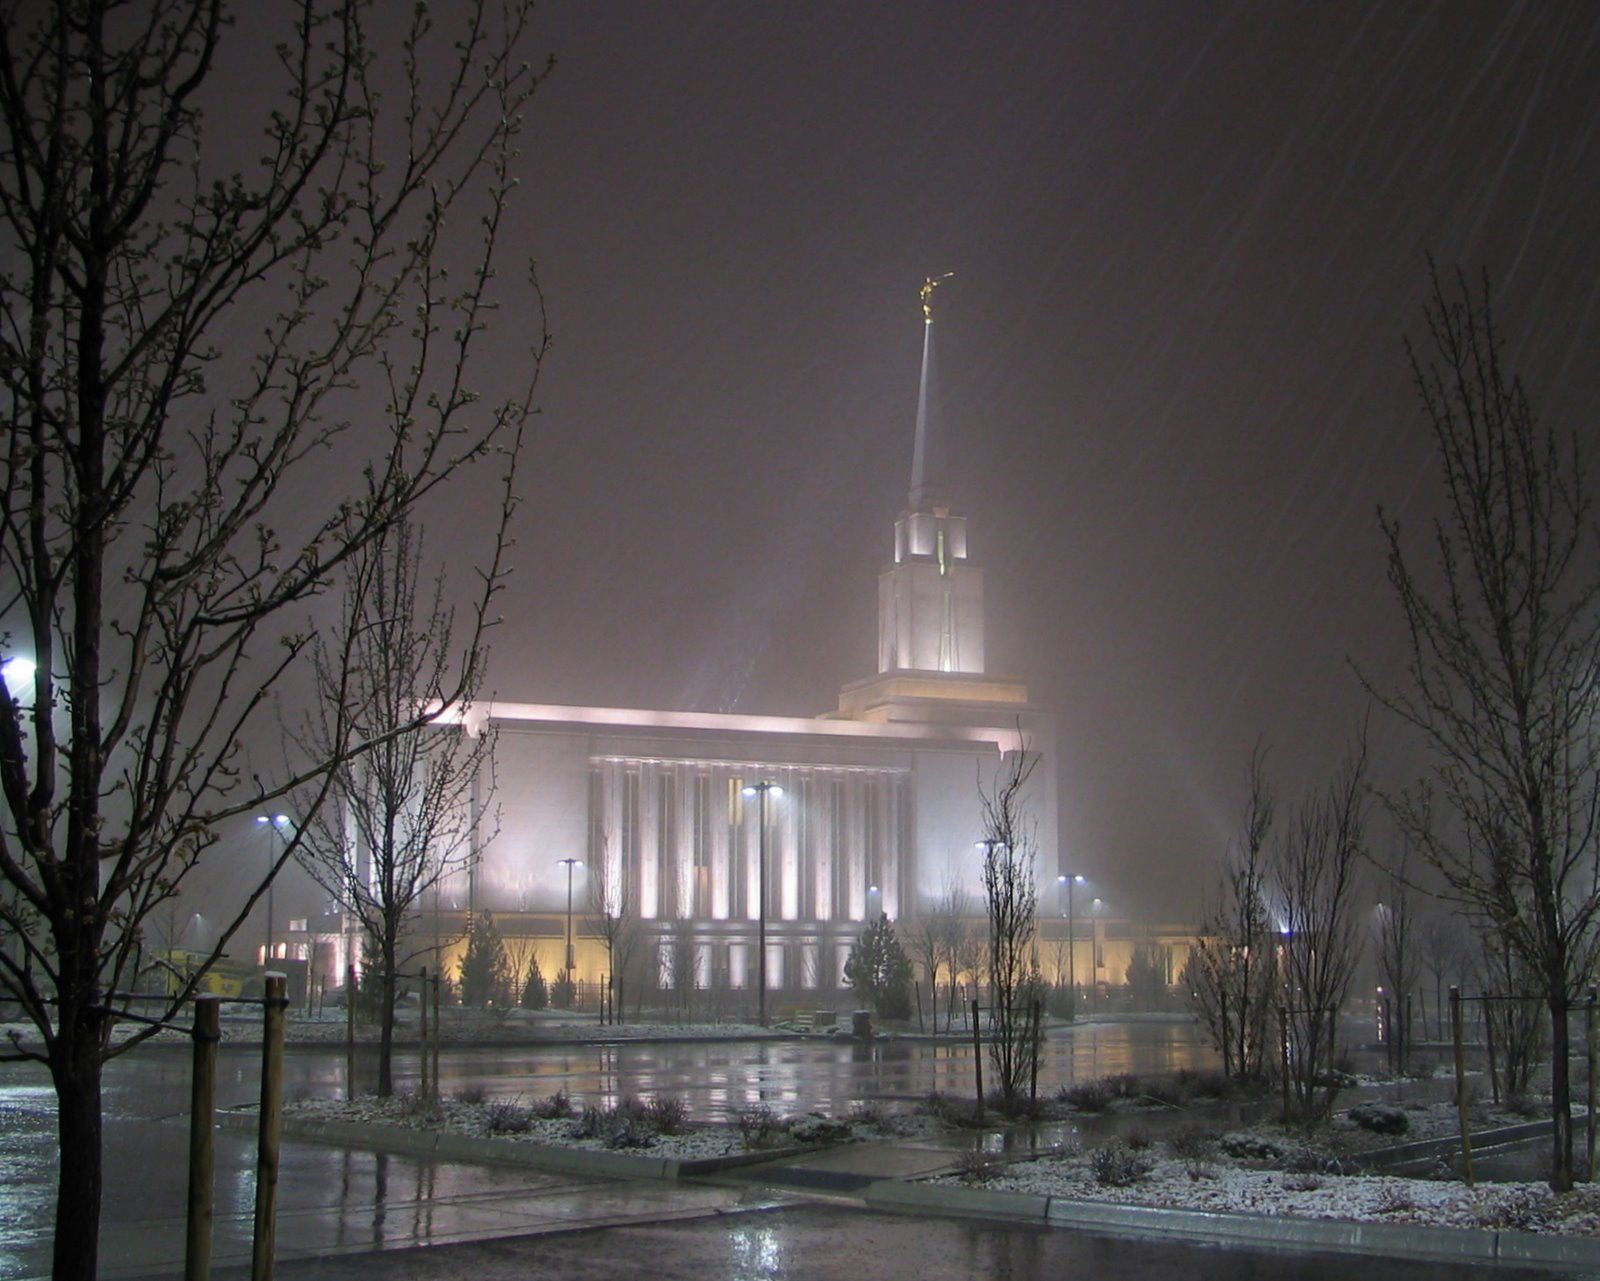 The Oquirrh Mountain Utah Temple in the evening during winter, including scenery.